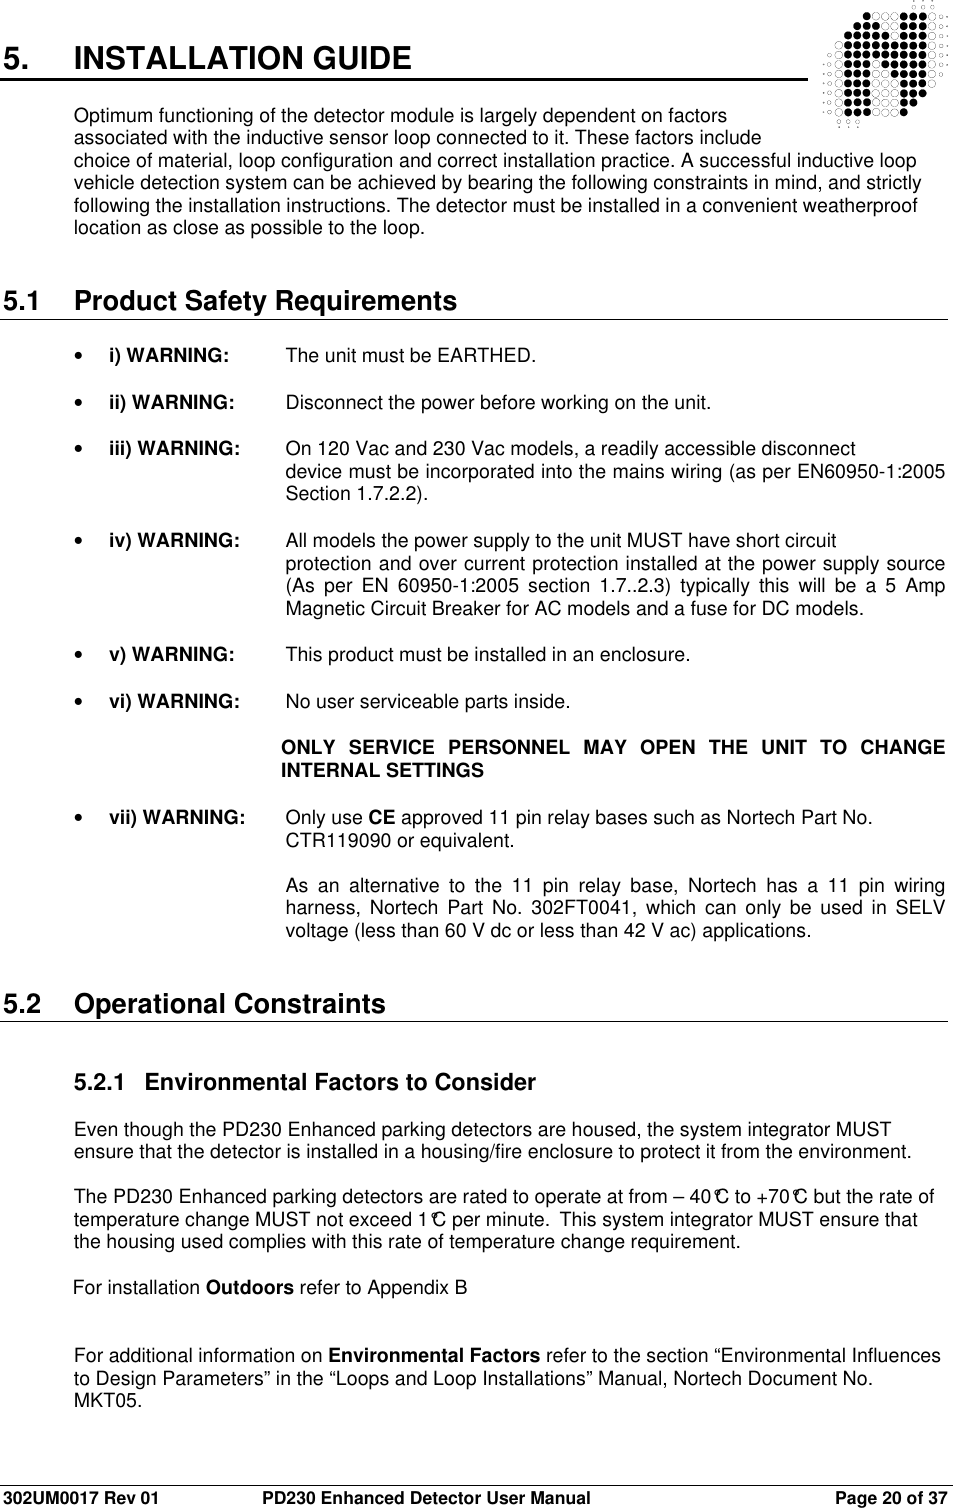  302UM0017 Rev 01  PD230 Enhanced Detector User Manual   Page 20 of 37 5.  INSTALLATION GUIDE  Optimum functioning of the detector module is largely dependent on factors associated with the inductive sensor loop connected to it. These factors include choice of material, loop configuration and correct installation practice. A successful inductive loop vehicle detection system can be achieved by bearing the following constraints in mind, and strictly following the installation instructions. The detector must be installed in a convenient weatherproof location as close as possible to the loop.   5.1  Product Safety Requirements  • i) WARNING:  The unit must be EARTHED.  • ii) WARNING:  Disconnect the power before working on the unit.  • iii) WARNING:  On 120 Vac and 230 Vac models, a readily accessible disconnect  device must be incorporated into the mains wiring (as per EN60950-1:2005 Section 1.7.2.2).  • iv) WARNING:  All models the power supply to the unit MUST have short circuit  protection and over current protection installed at the power supply source (As  per  EN  60950-1:2005  section  1.7..2.3)  typically  this  will  be  a  5  Amp Magnetic Circuit Breaker for AC models and a fuse for DC models.  • v) WARNING:  This product must be installed in an enclosure.  • vi) WARNING:  No user serviceable parts inside.  ONLY  SERVICE  PERSONNEL  MAY  OPEN  THE  UNIT  TO  CHANGE INTERNAL SETTINGS  • vii) WARNING:  Only use CE approved 11 pin relay bases such as Nortech Part No.  CTR119090 or equivalent.   As  an  alternative  to  the  11  pin  relay  base,  Nortech  has  a  11  pin  wiring harness,  Nortech  Part  No. 302FT0041,  which  can only  be  used in  SELV voltage (less than 60 V dc or less than 42 V ac) applications.   5.2  Operational Constraints   5.2.1  Environmental Factors to Consider  Even though the PD230 Enhanced parking detectors are housed, the system integrator MUST ensure that the detector is installed in a housing/fire enclosure to protect it from the environment.  The PD230 Enhanced parking detectors are rated to operate at from – 40°C to +70°C but the rate of temperature change MUST not exceed 1°C per minute.  This system integrator MUST ensure that the housing used complies with this rate of temperature change requirement.  For installation Outdoors refer to Appendix B   For additional information on Environmental Factors refer to the section “Environmental Influences to Design Parameters” in the “Loops and Loop Installations” Manual, Nortech Document No. MKT05.  